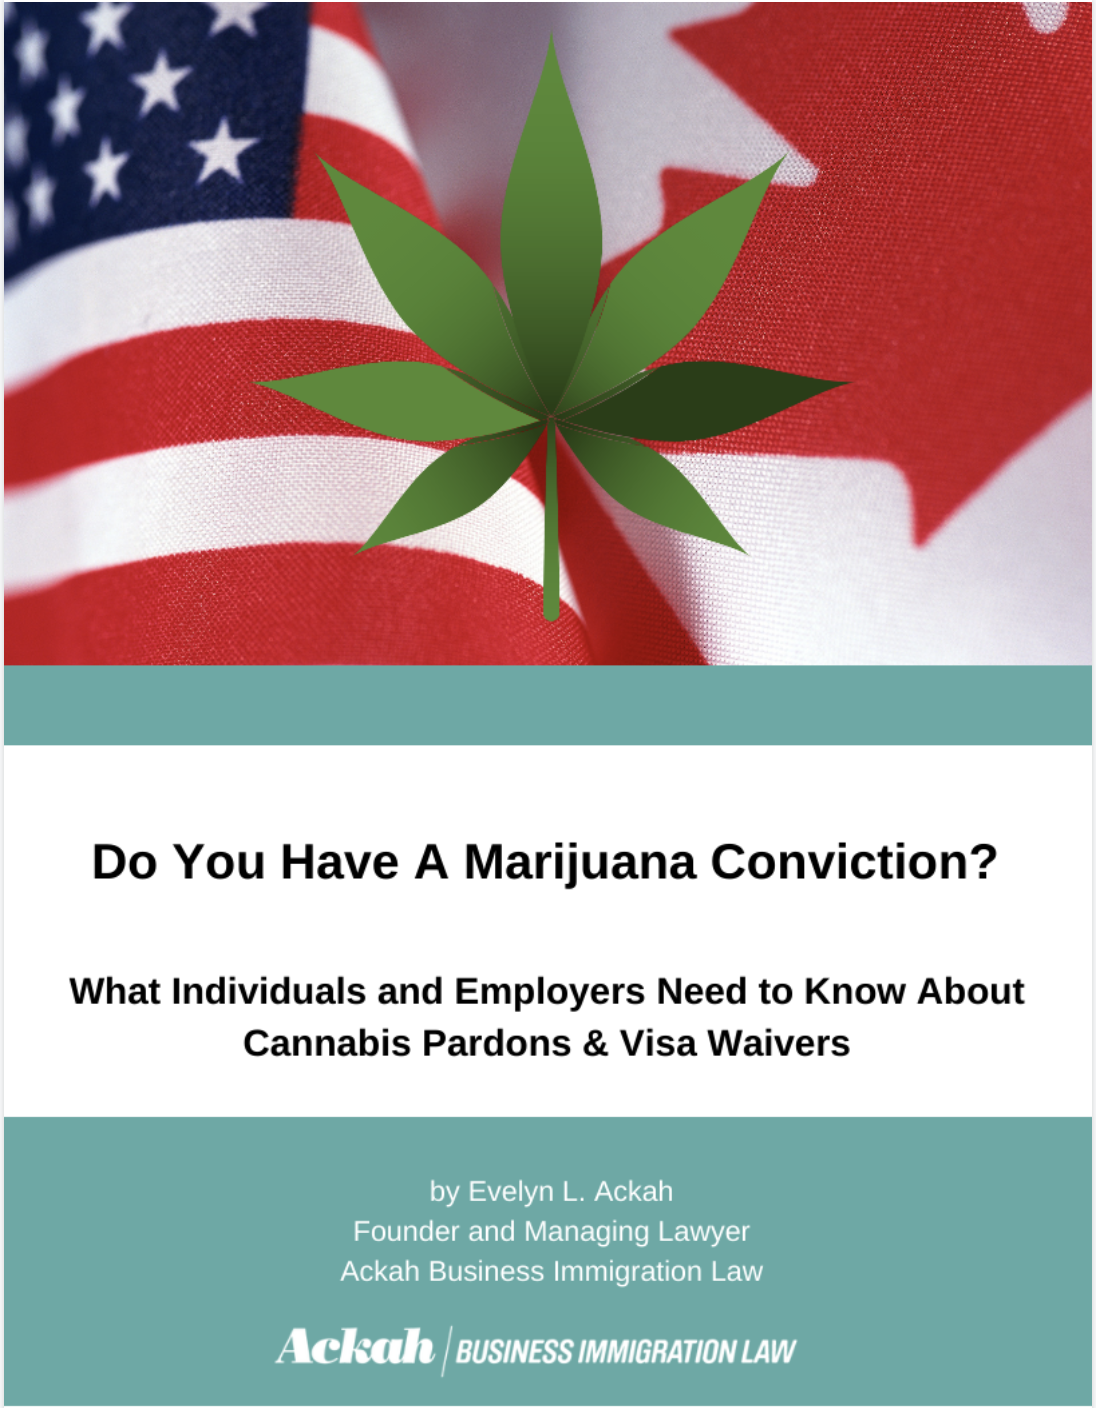 Do You Have A Marijuana Conviction? Cross Border Travel: What Individuals and Employers Need to Know About Cannabis Pardons & Visa Waivers Free eBook